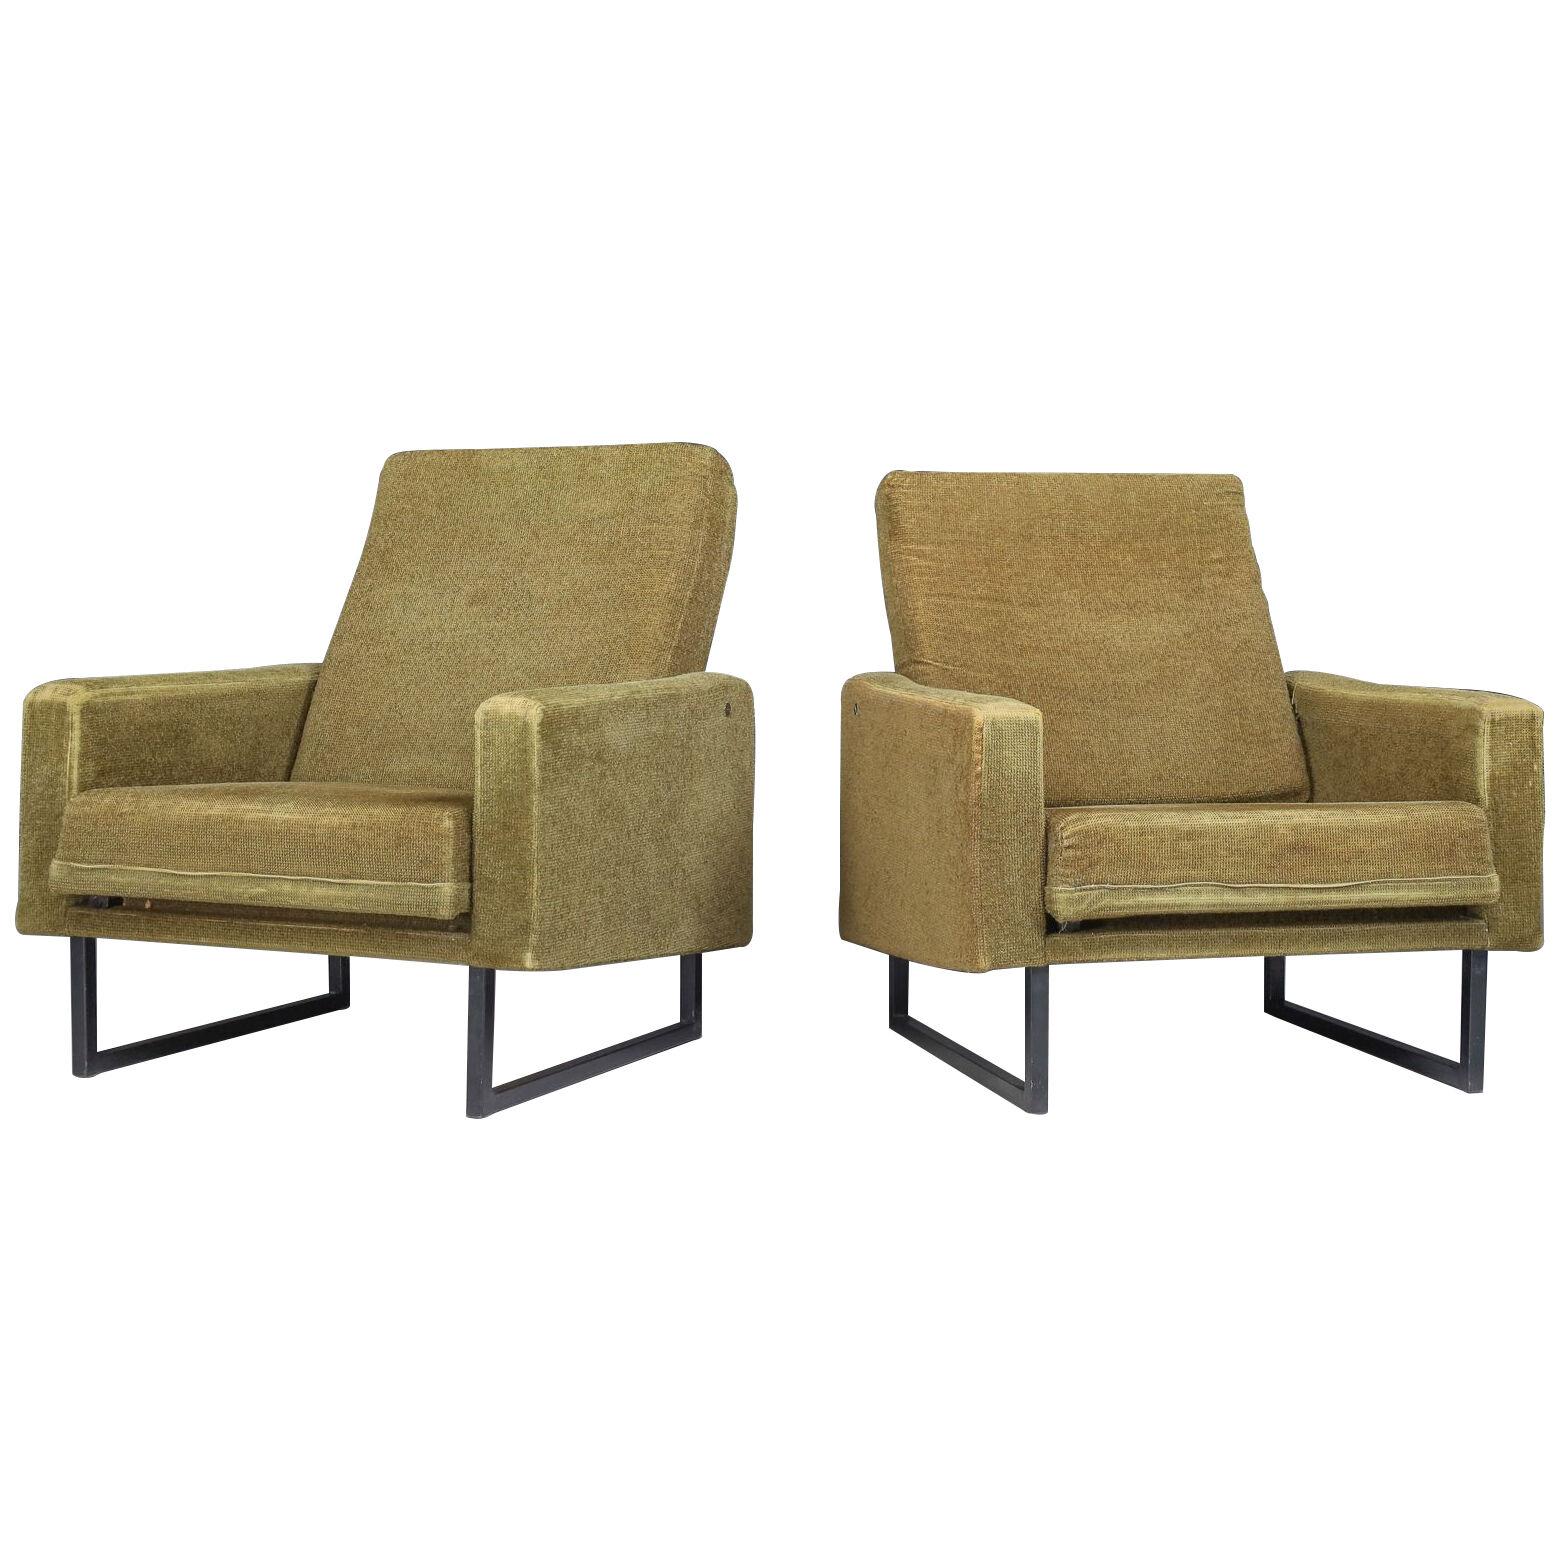 Pair Lounge Chairs by René Jean Caillette for Steiner in Original Fabric, 1963